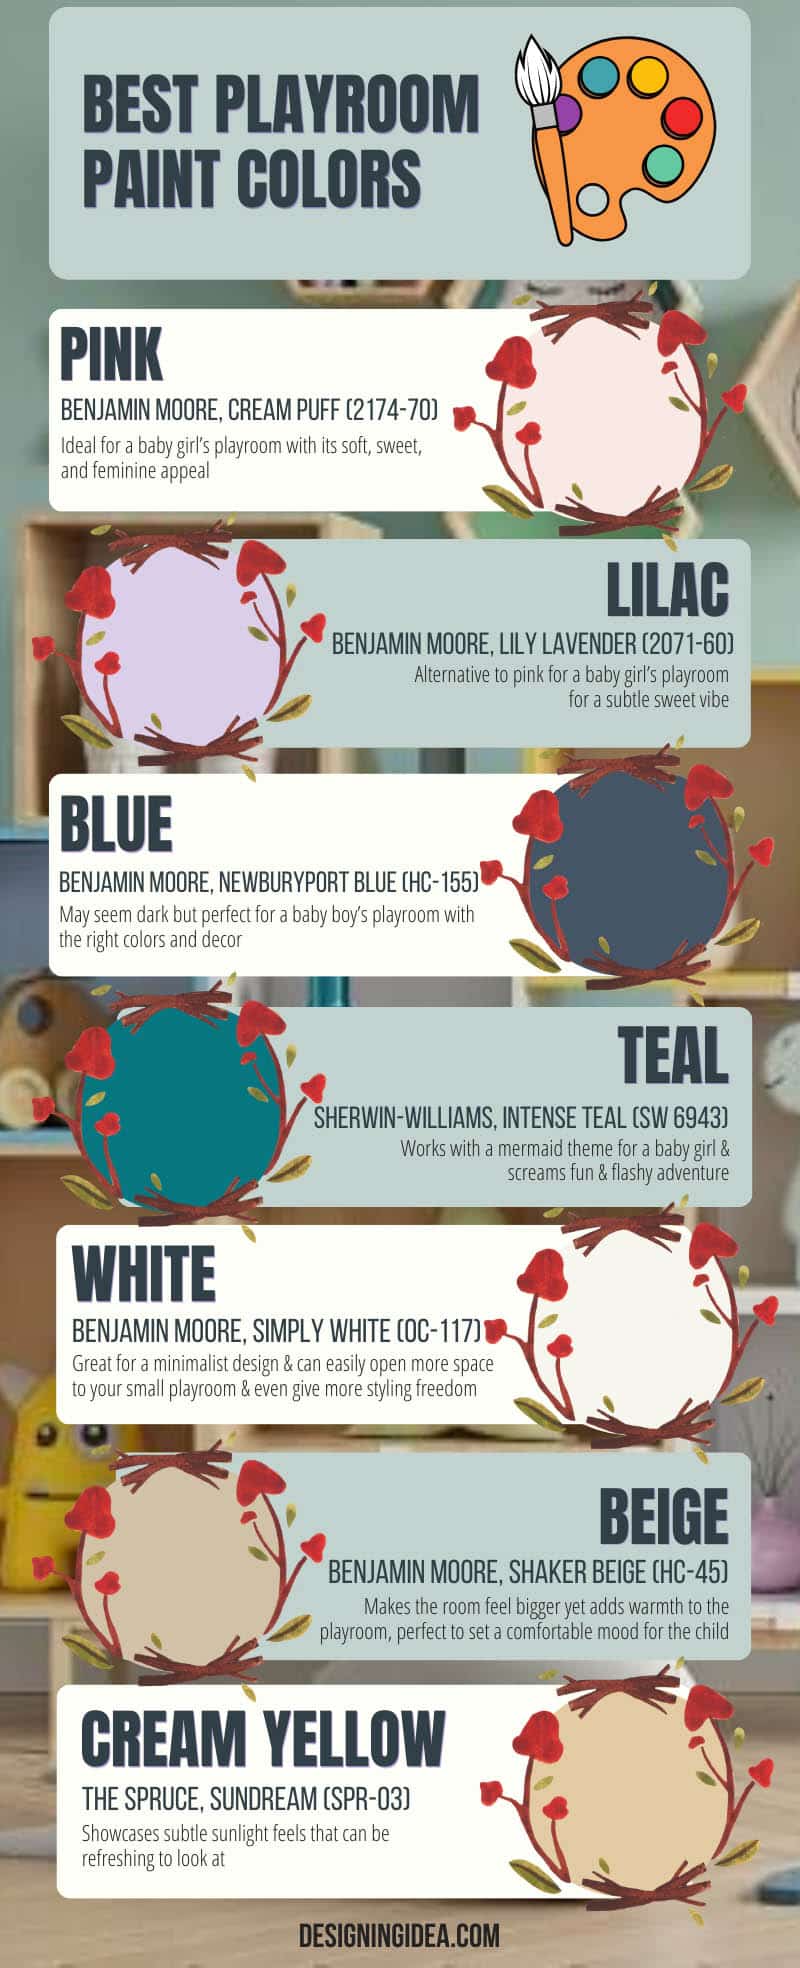 Best playroom paint colors infographic